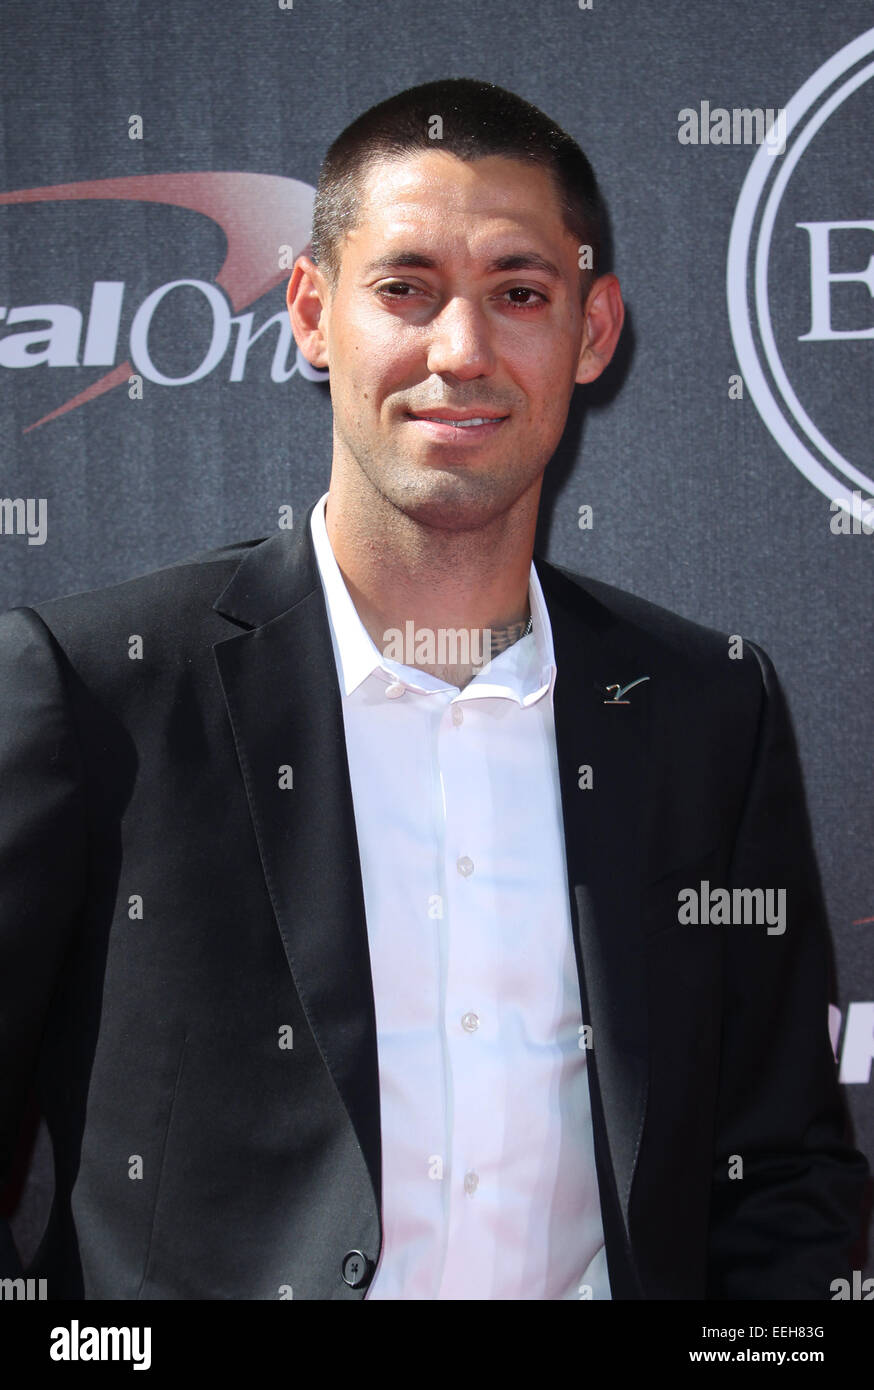 2014 ESPYS Awards - Arrivals  Featuring: Clint Dempsey Where: Los Angeles, California, United States When: 16 Jul 2014 Stock Photo